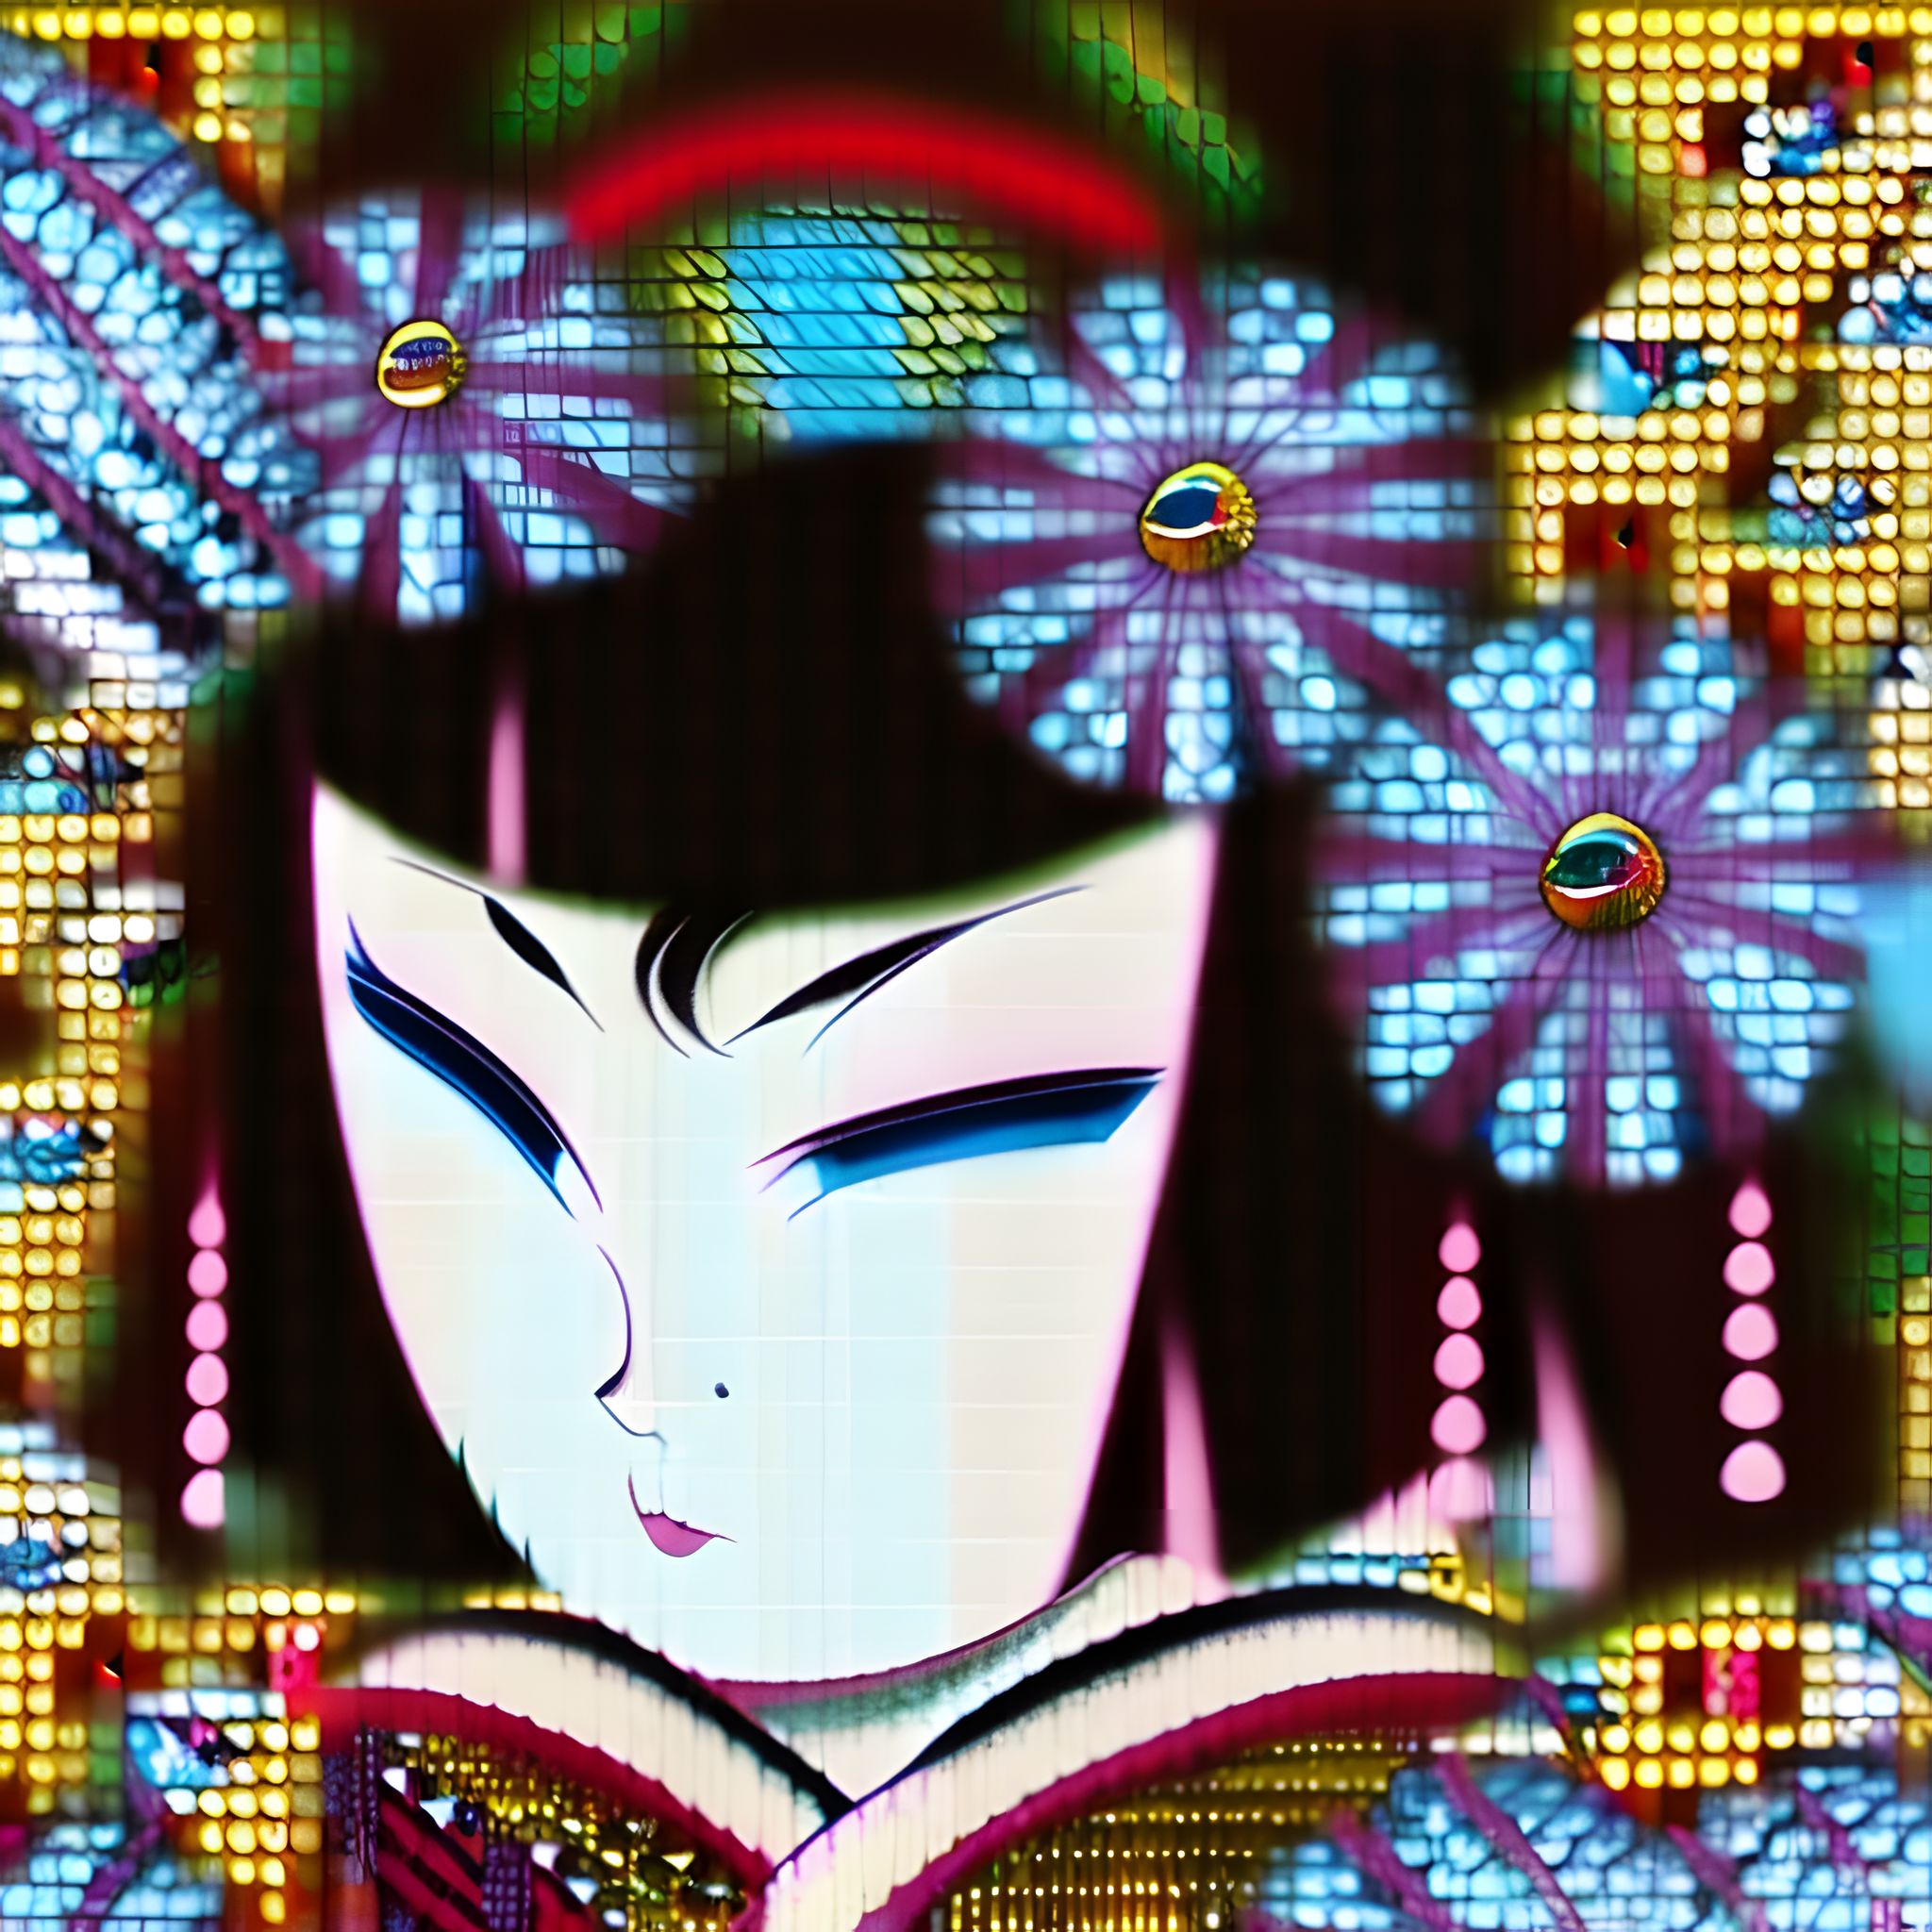 Geisha-in-the-middle-of-the-frame-face-focused-one-face-colorful-Neo-Tokyo-lots-of-details-Shu-j5wh